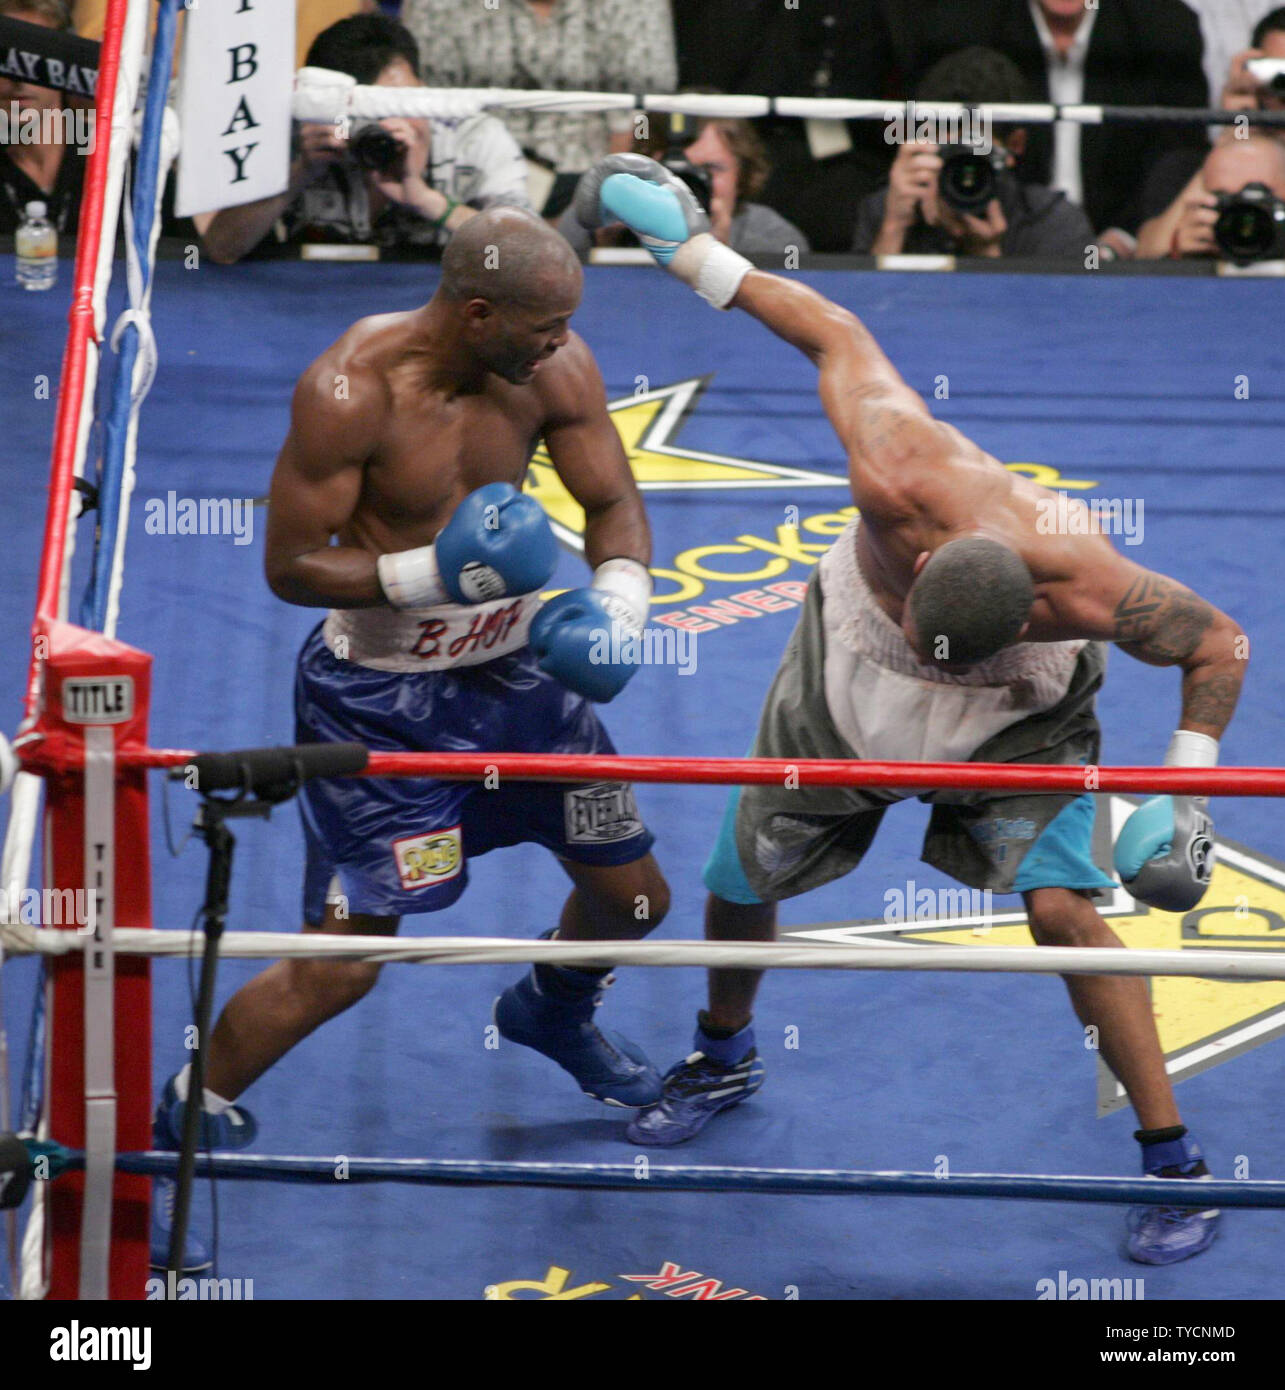 Champion Bernard Hopkins (L) hits challenger Winky Wright with a left during the Ring Magazine Light Heavyweight title fight at Mandalay Bay in Las Vegas on July 21, 2007. Hopkins won by decision.  (UPI Photo/Roger Williams) Stock Photo